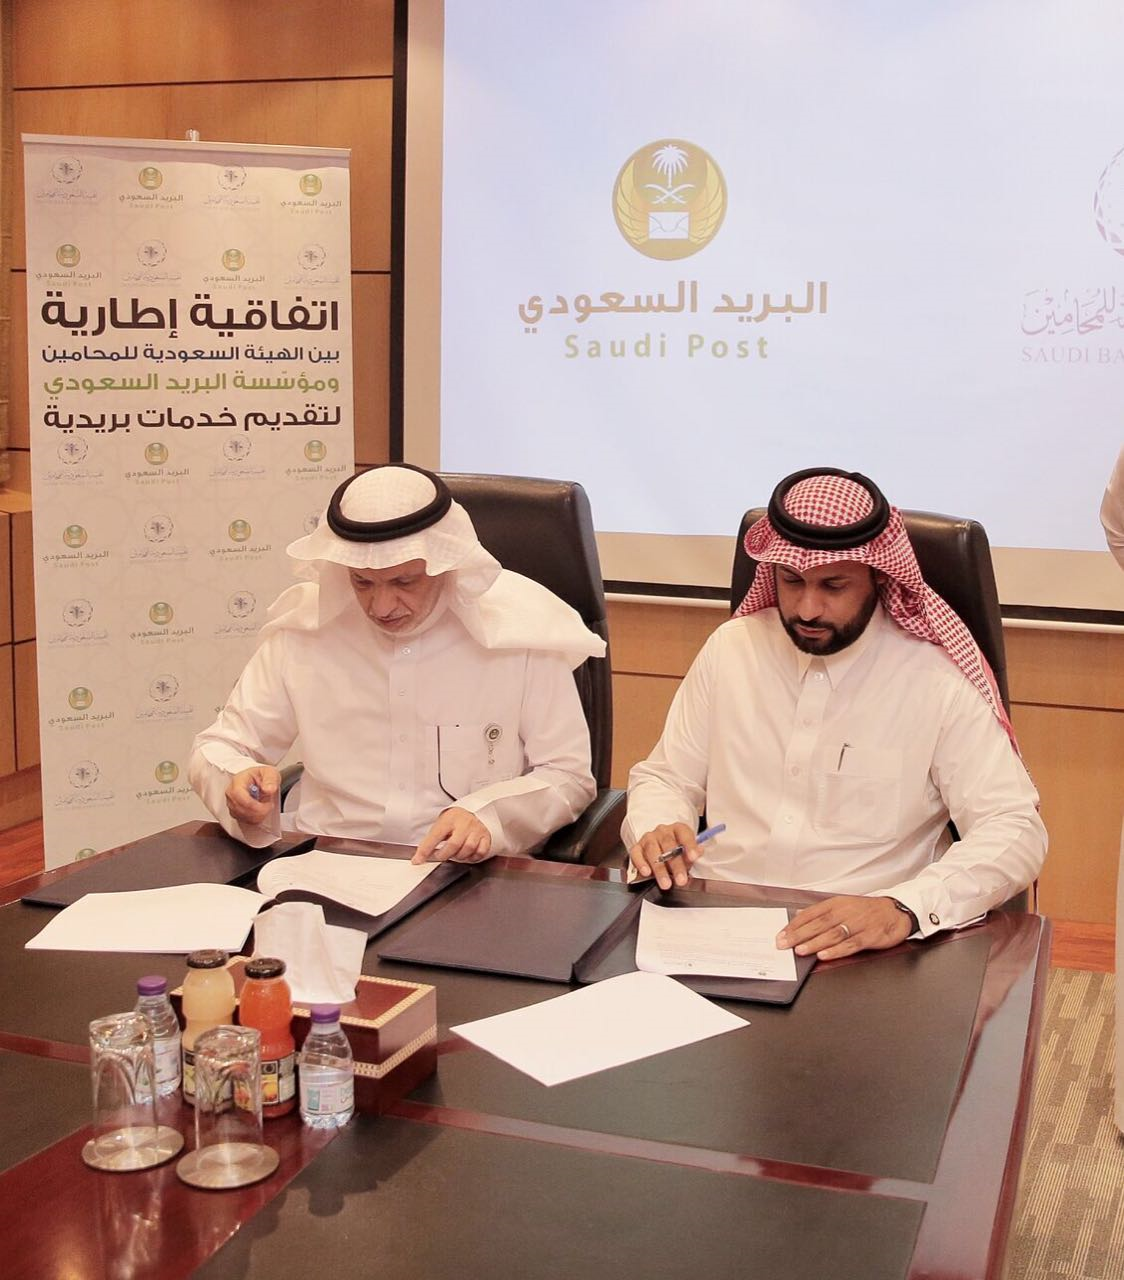 Saudi Post signed an agreement with Saudi Bar Association to provide logistical services